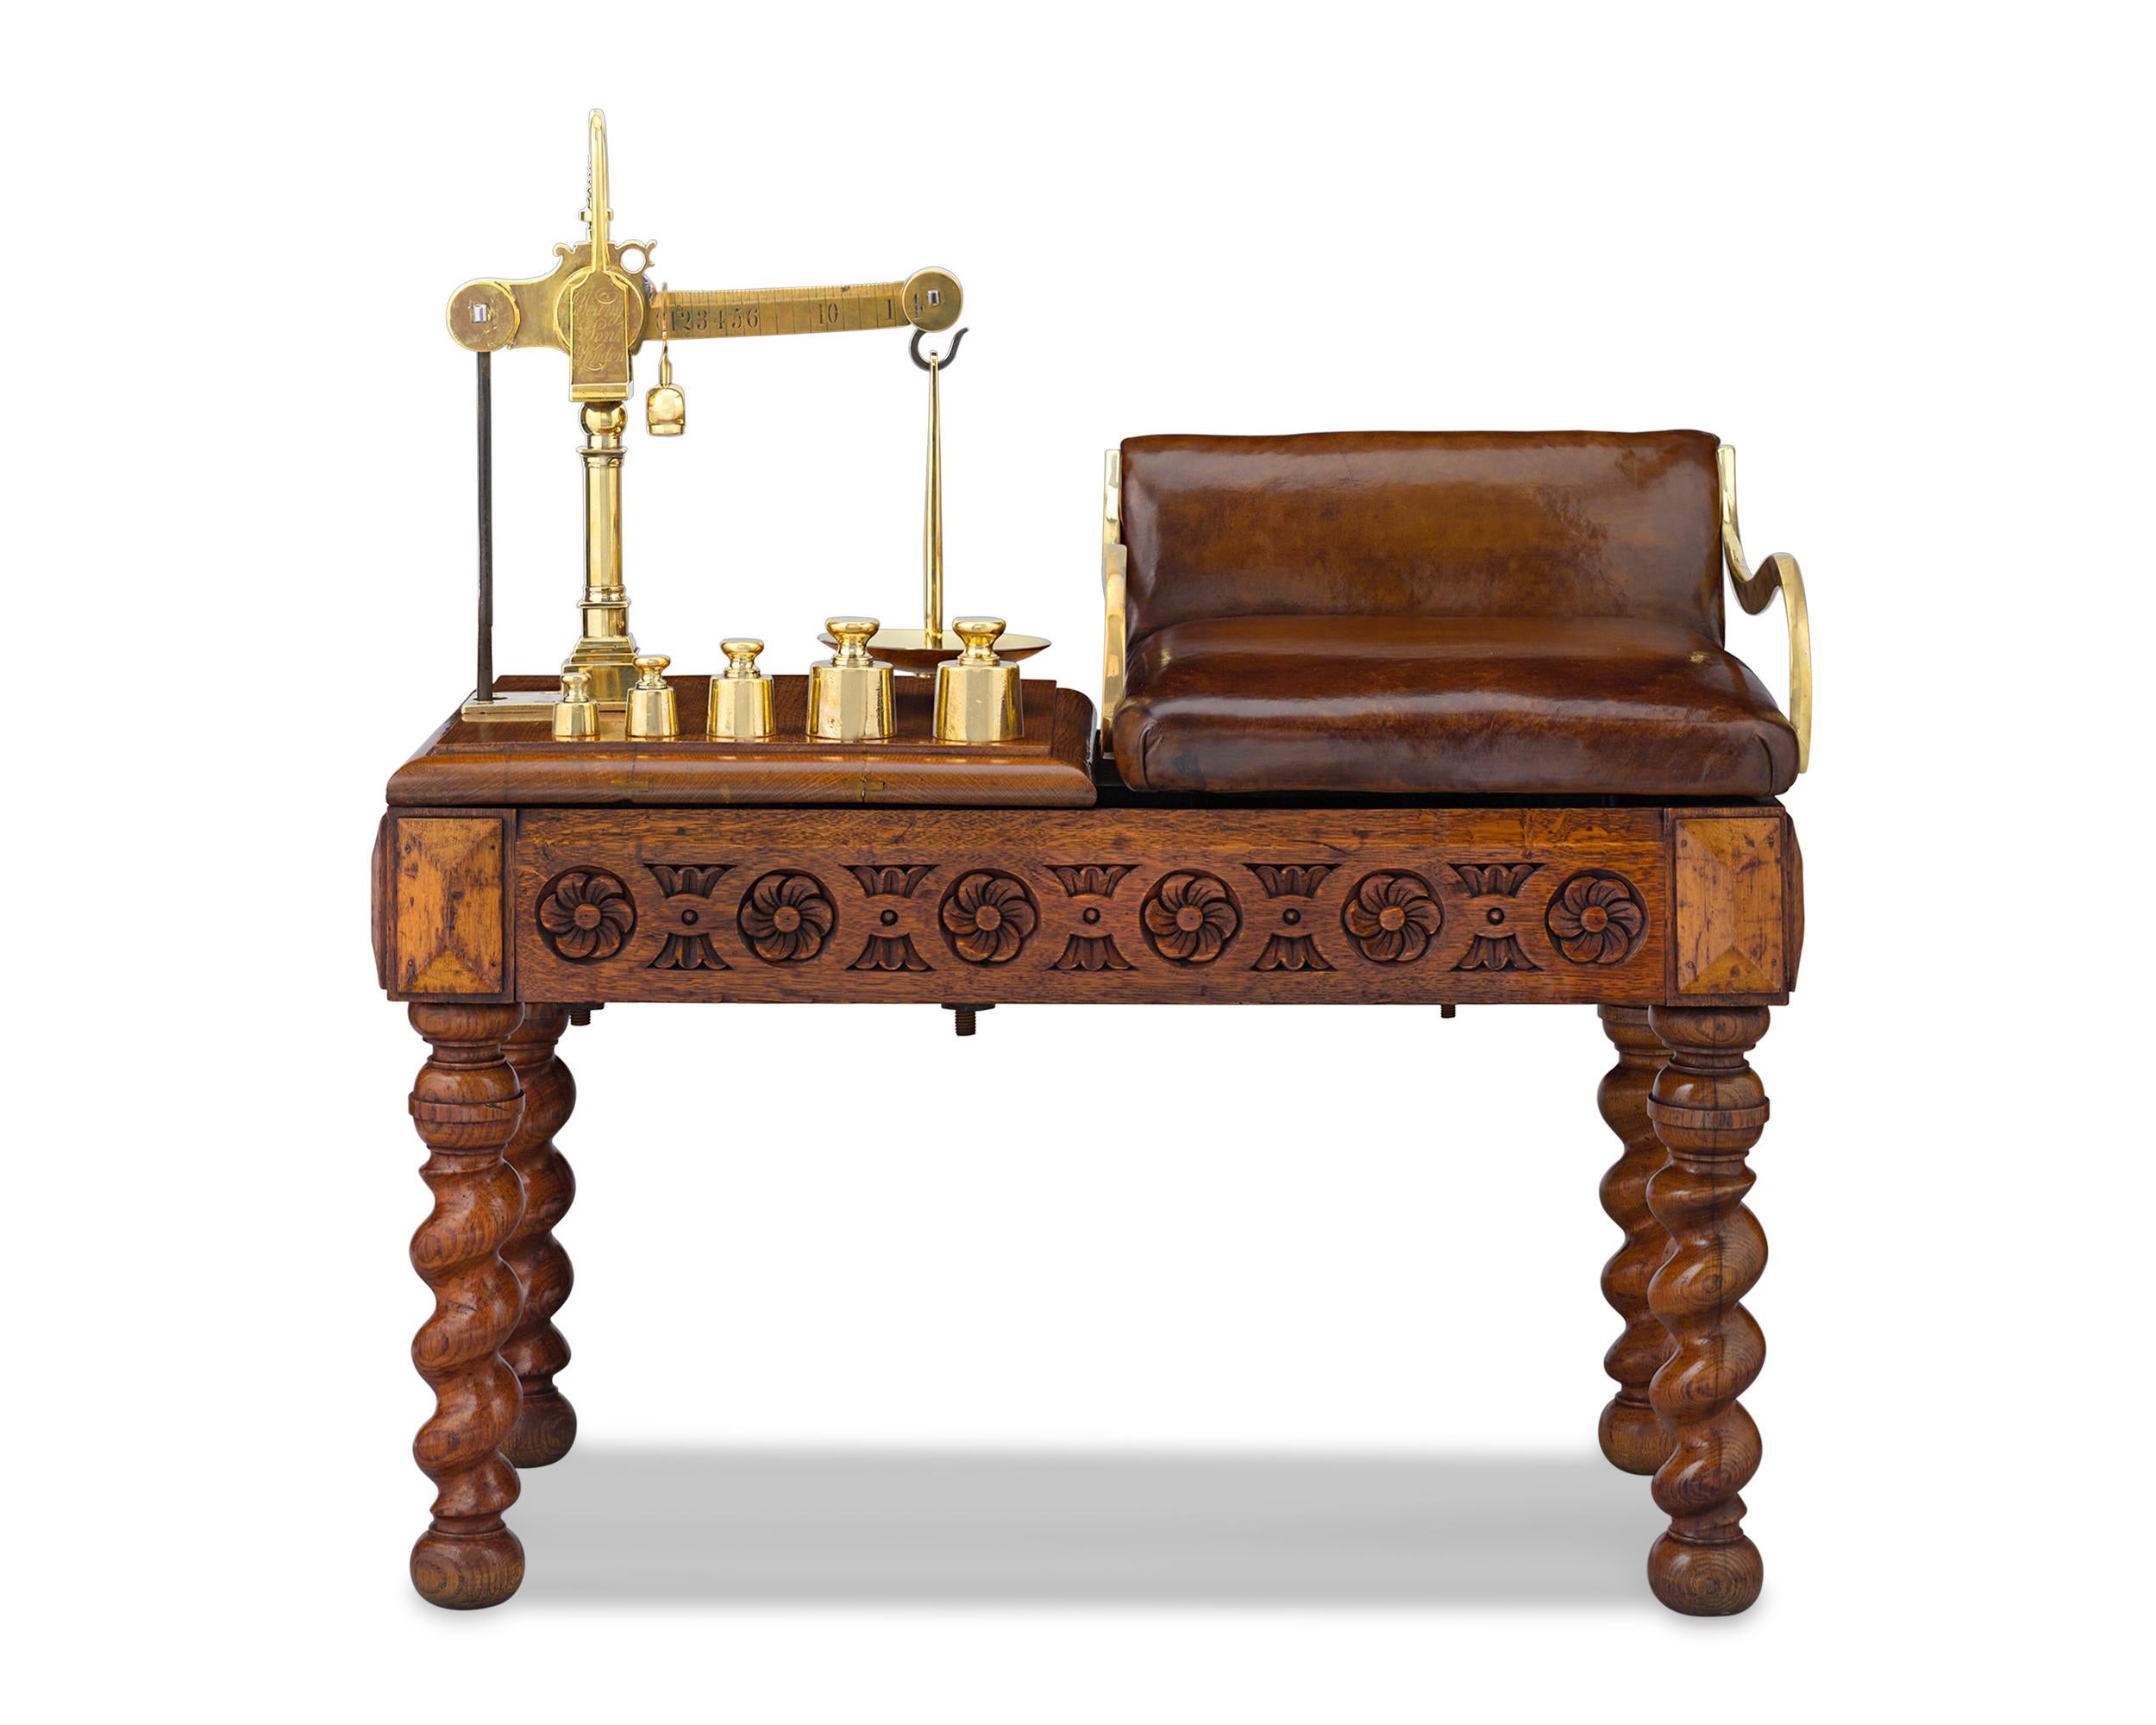 This handsome English solid oak jockey scale retains its original upholstery and five brass weights by Young & Son. These beautiful scales were used at English tracks to determine the jockey’s weight before a big race. This was done to prevent any